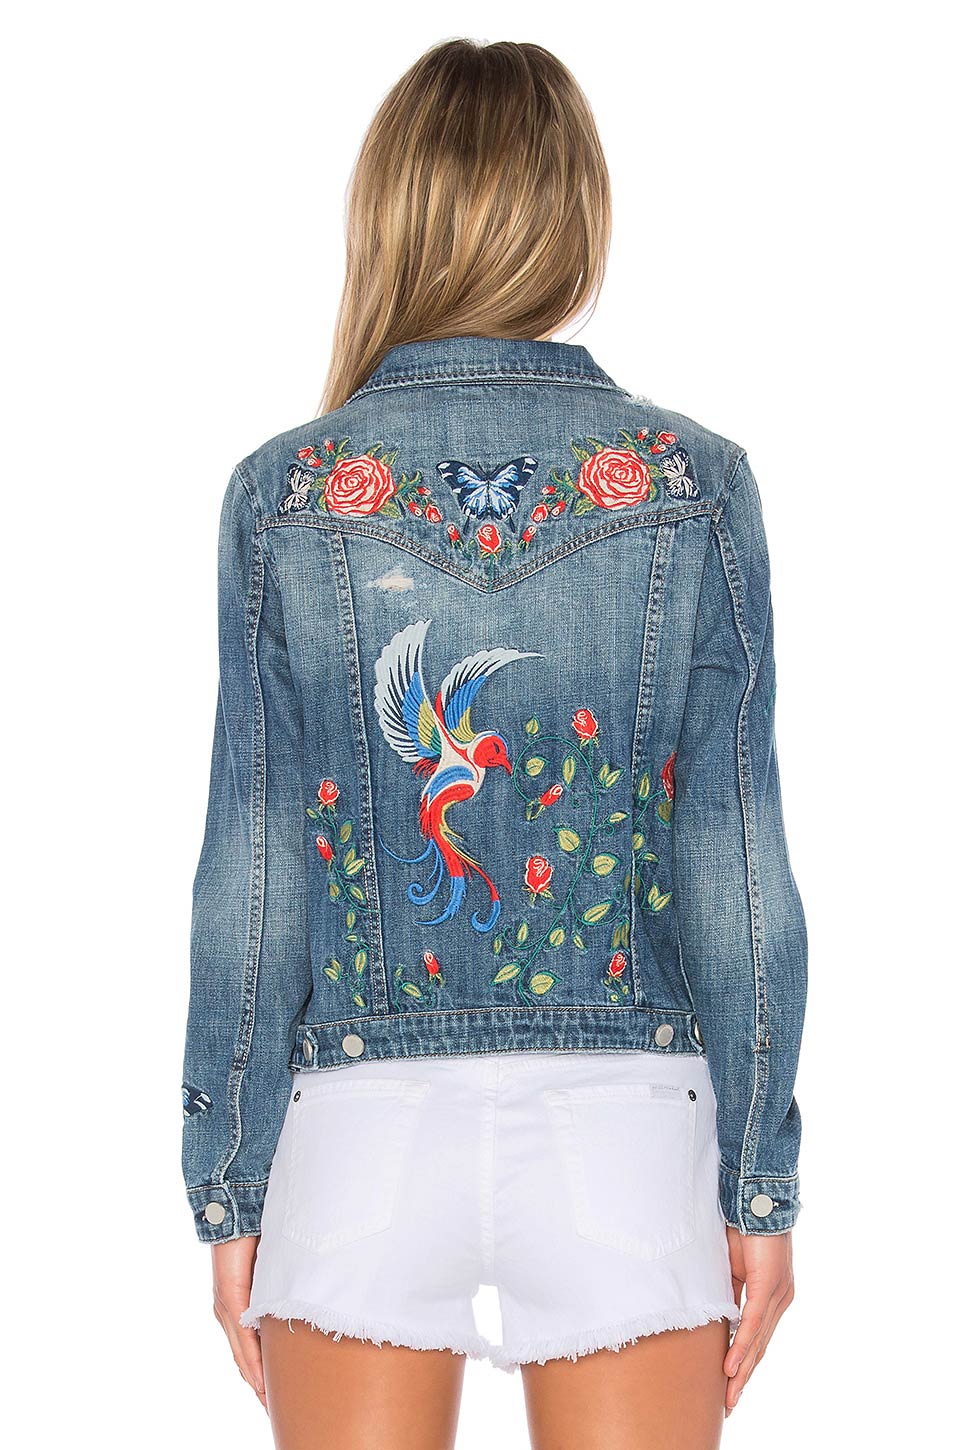 Find Of The Week: BLANK NYC Embroidered Denim Jacket - The Jeans Blog